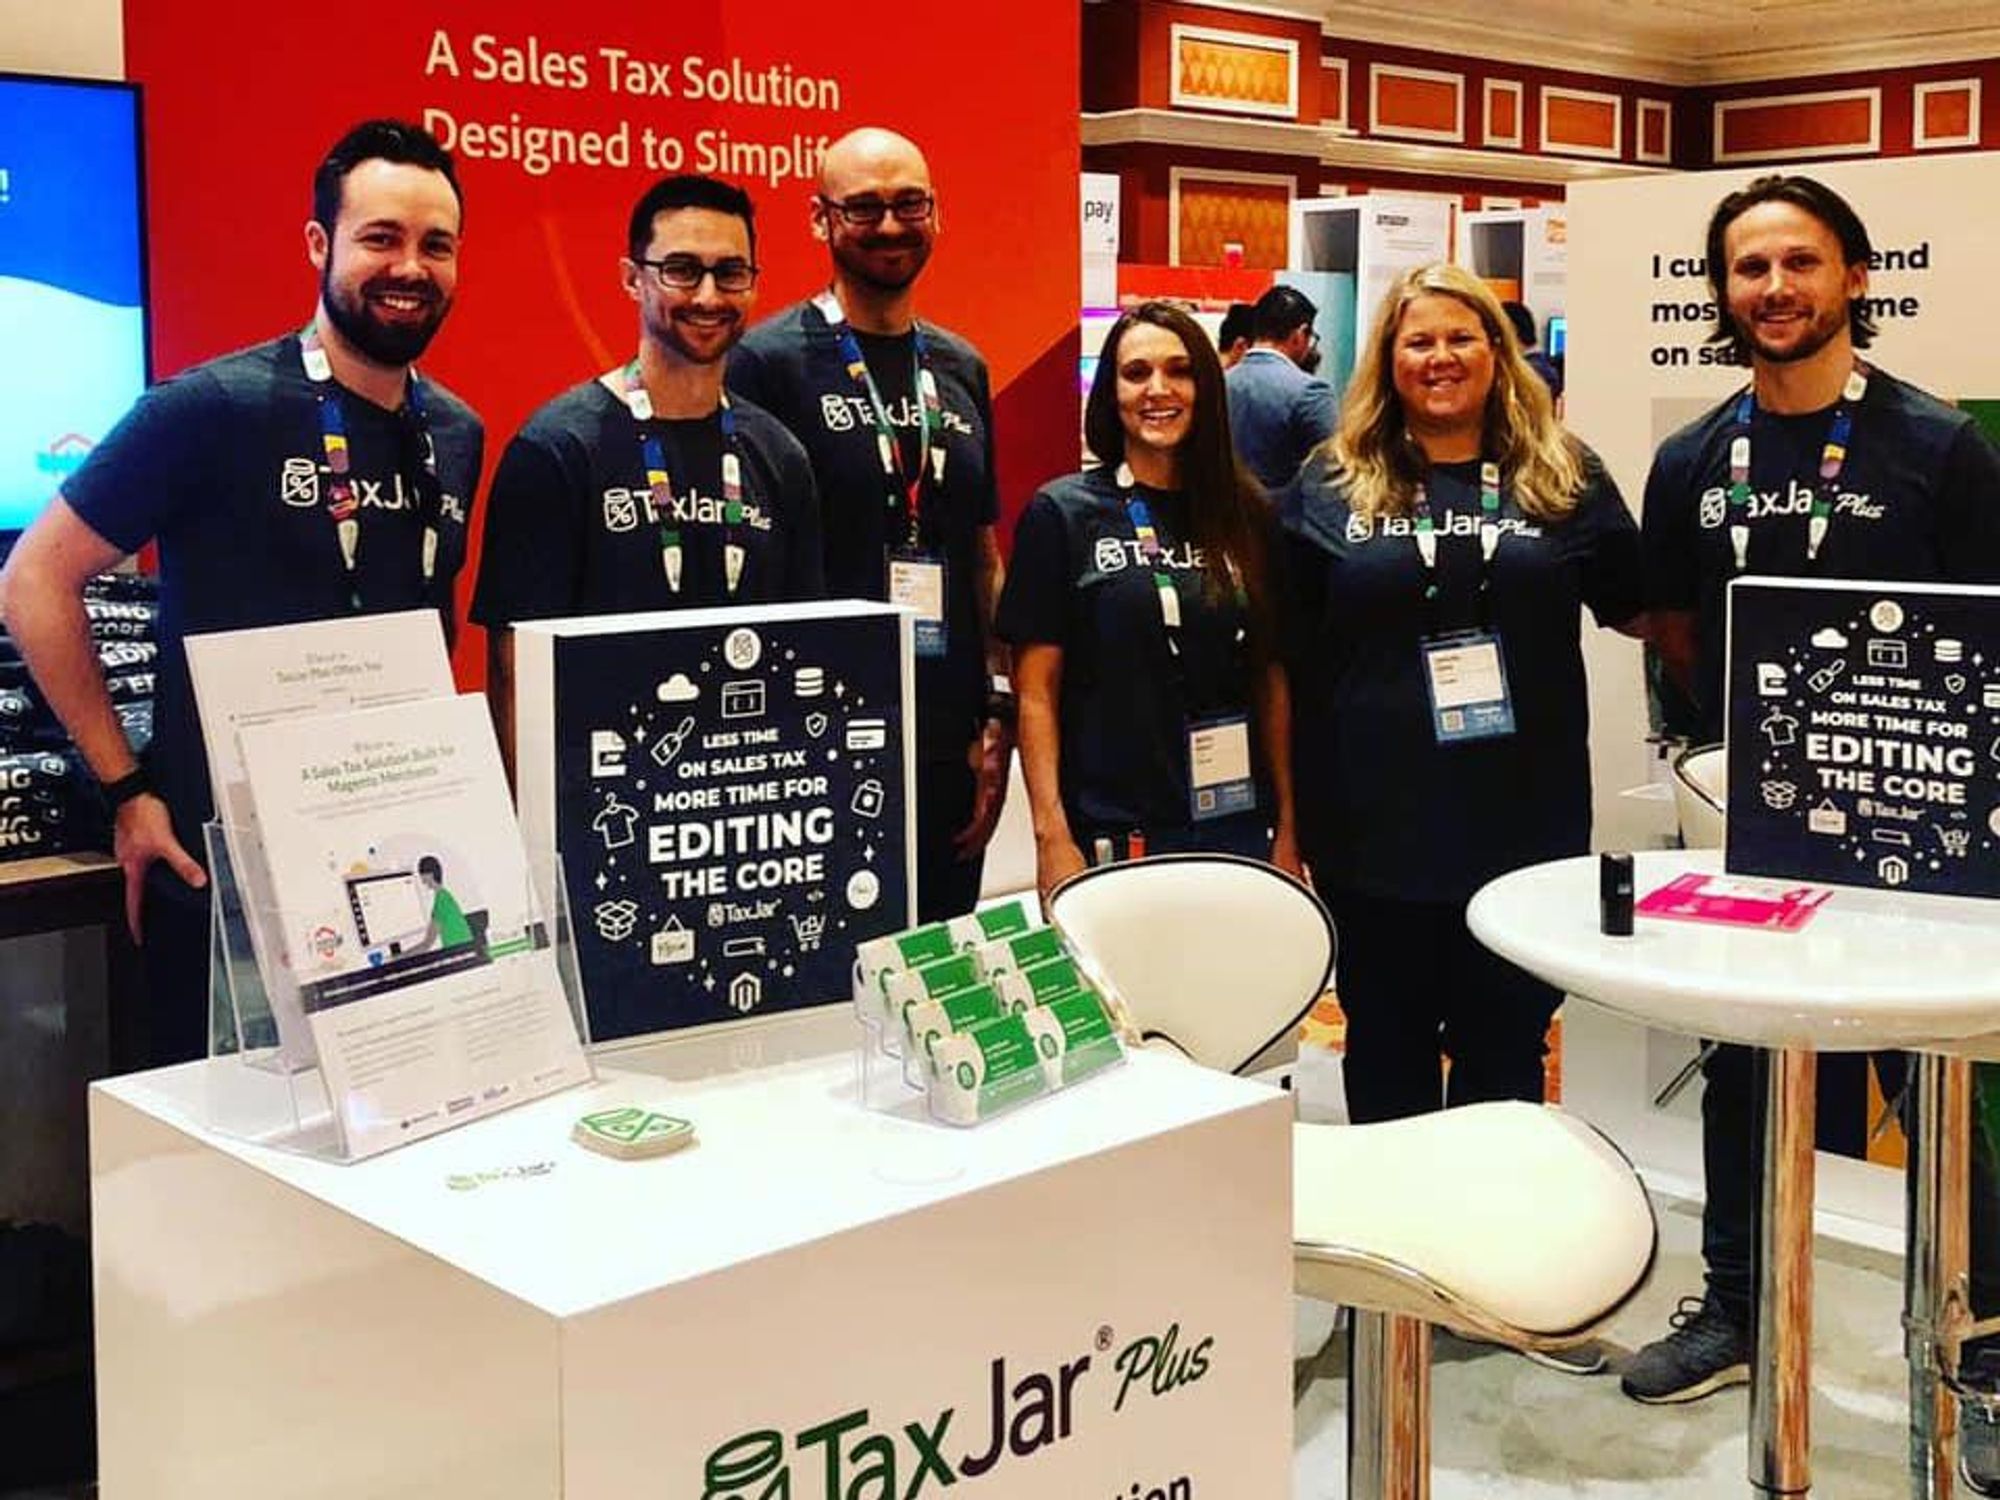 Members of the TaxJar team promote the company's products.